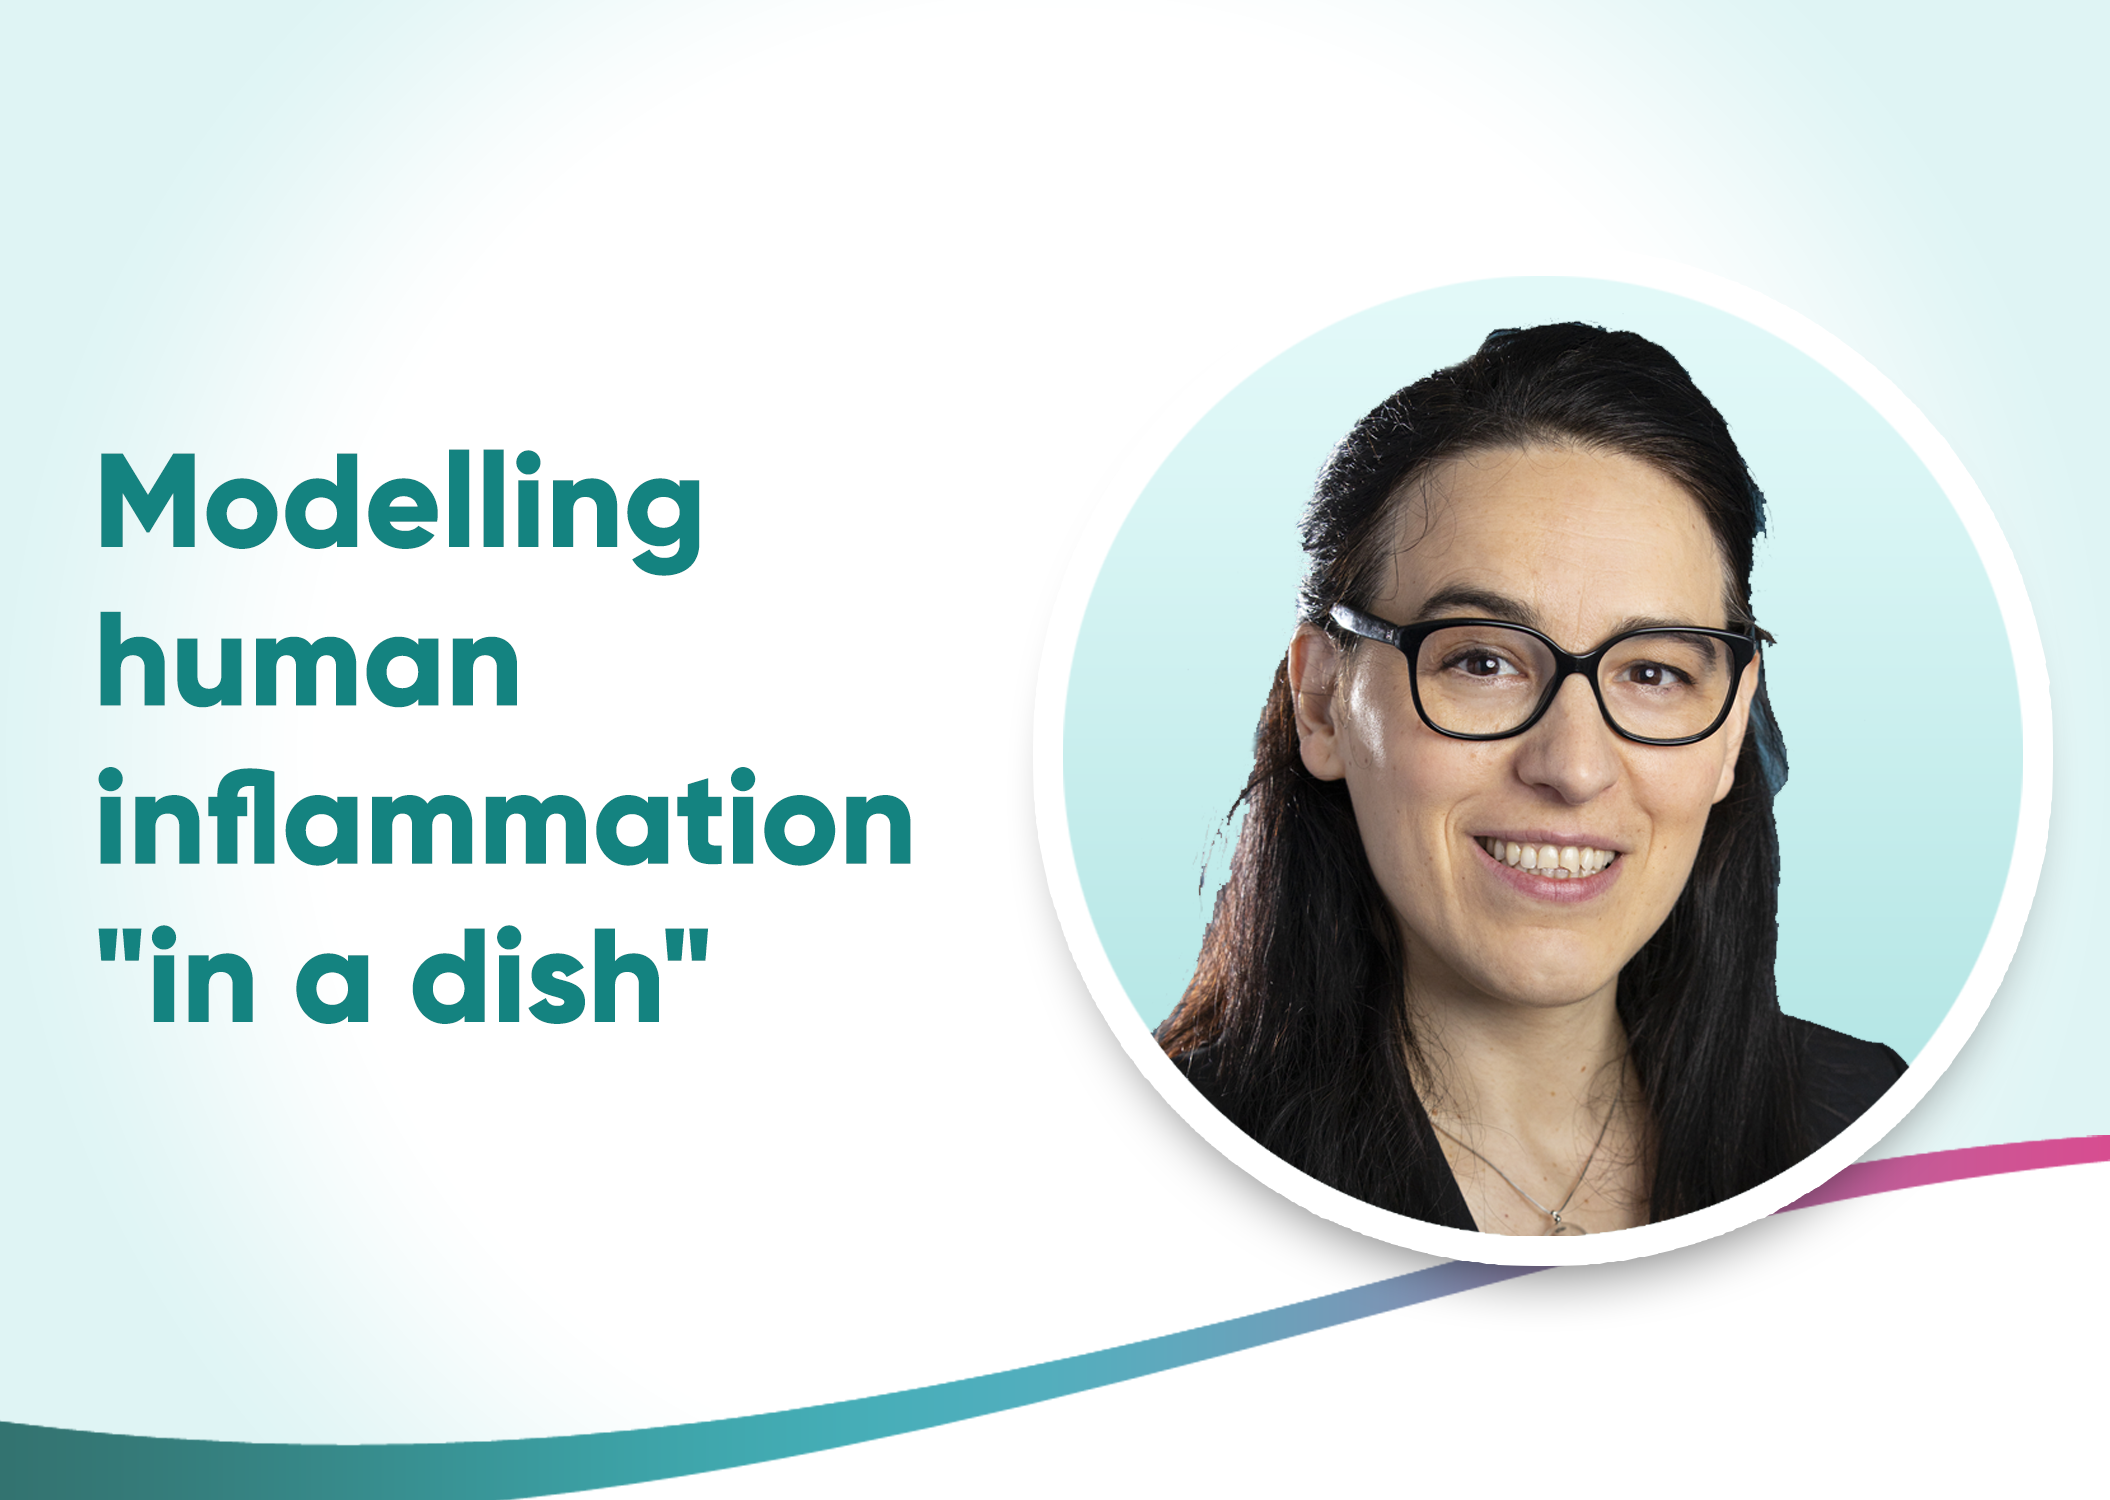 Modelling human inflammation “in a dish”